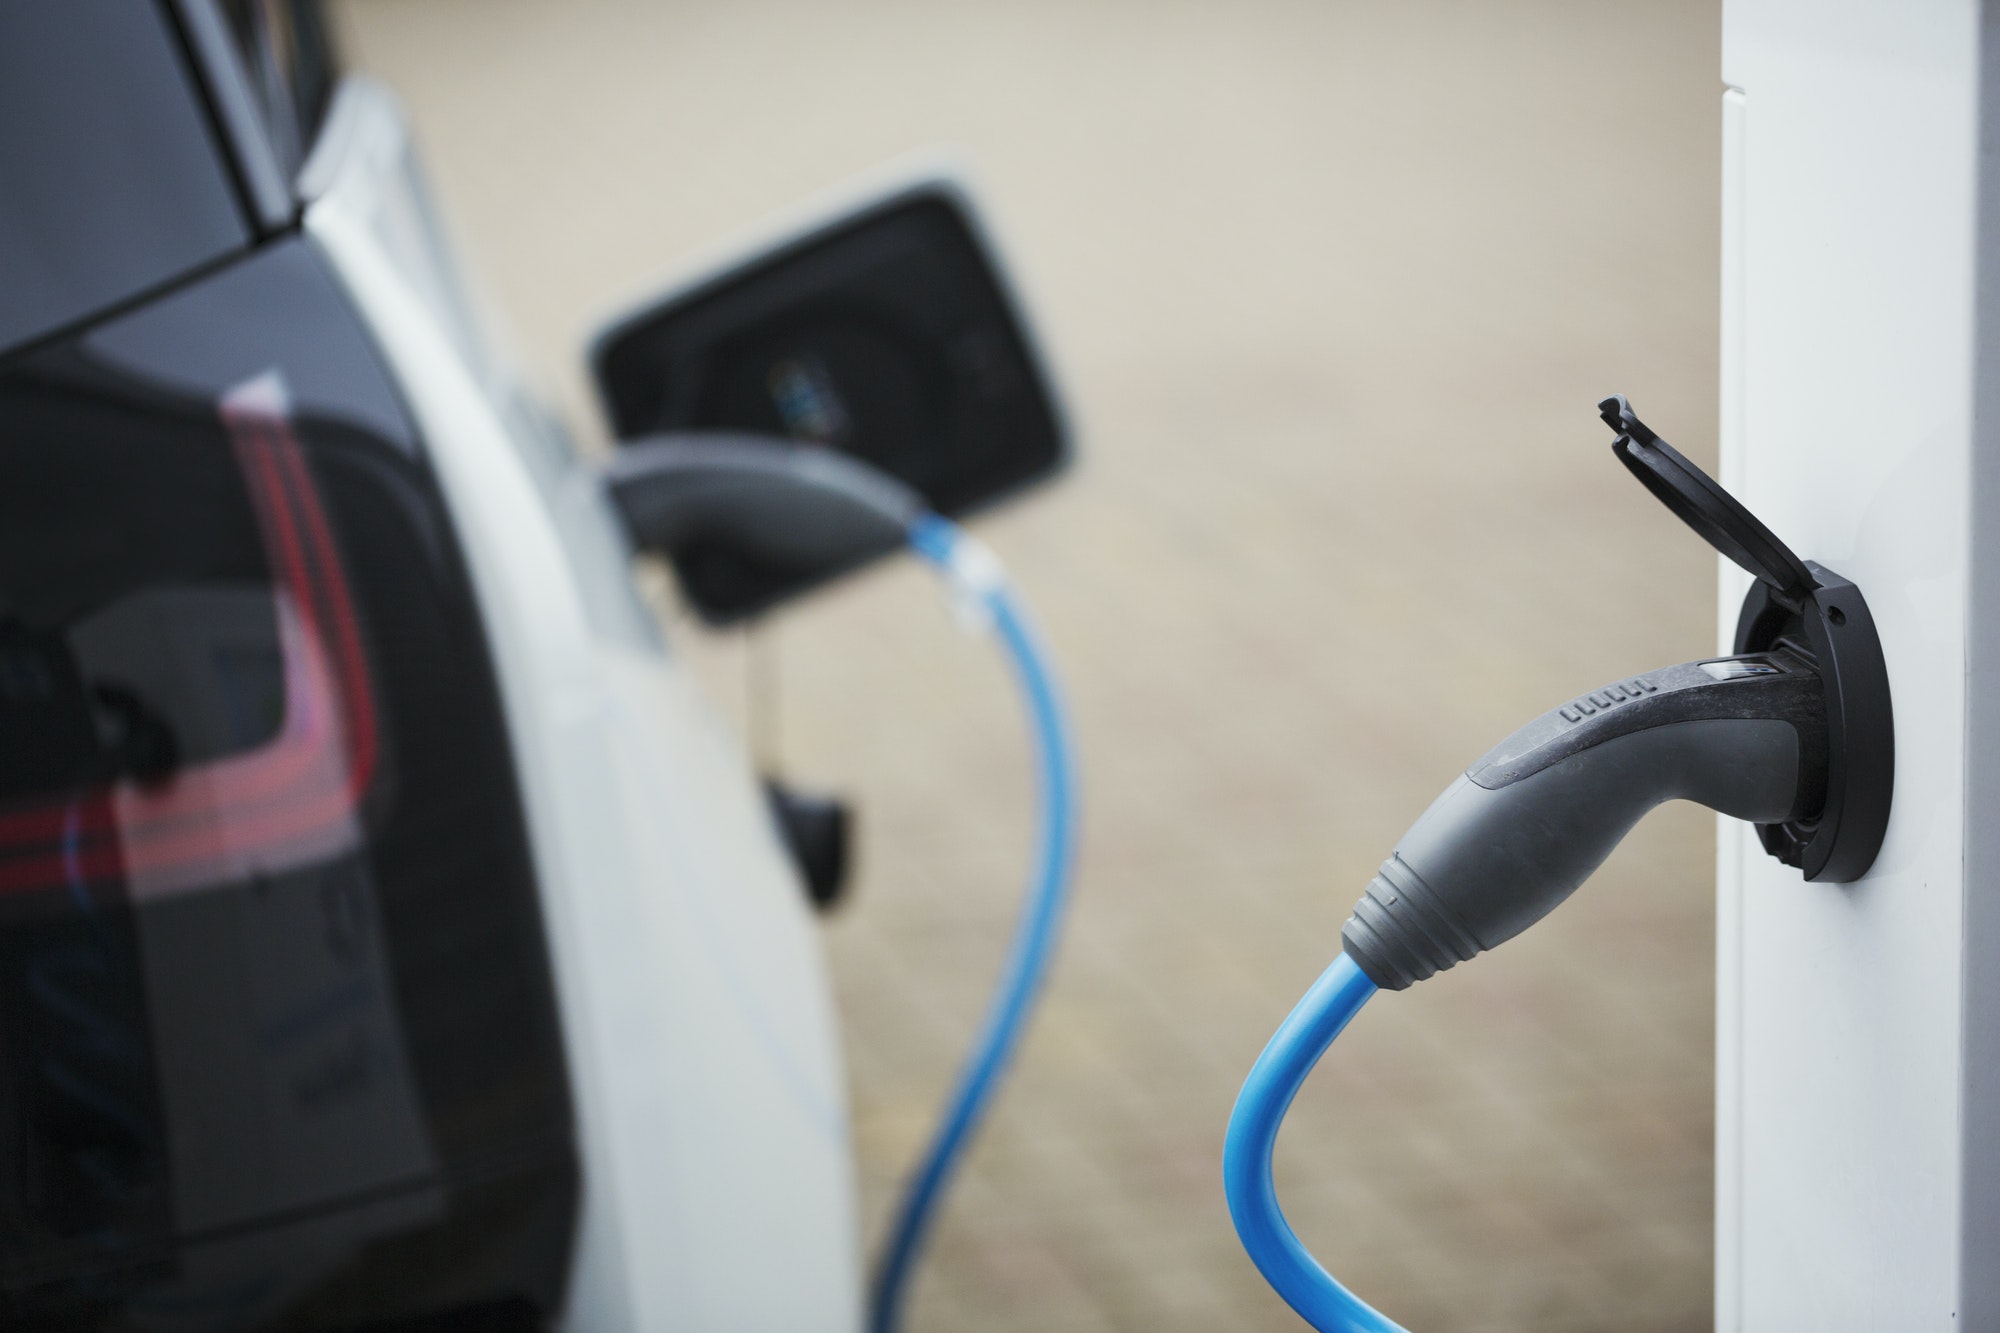 Electric car being charged with a cable connected to a wall socket.